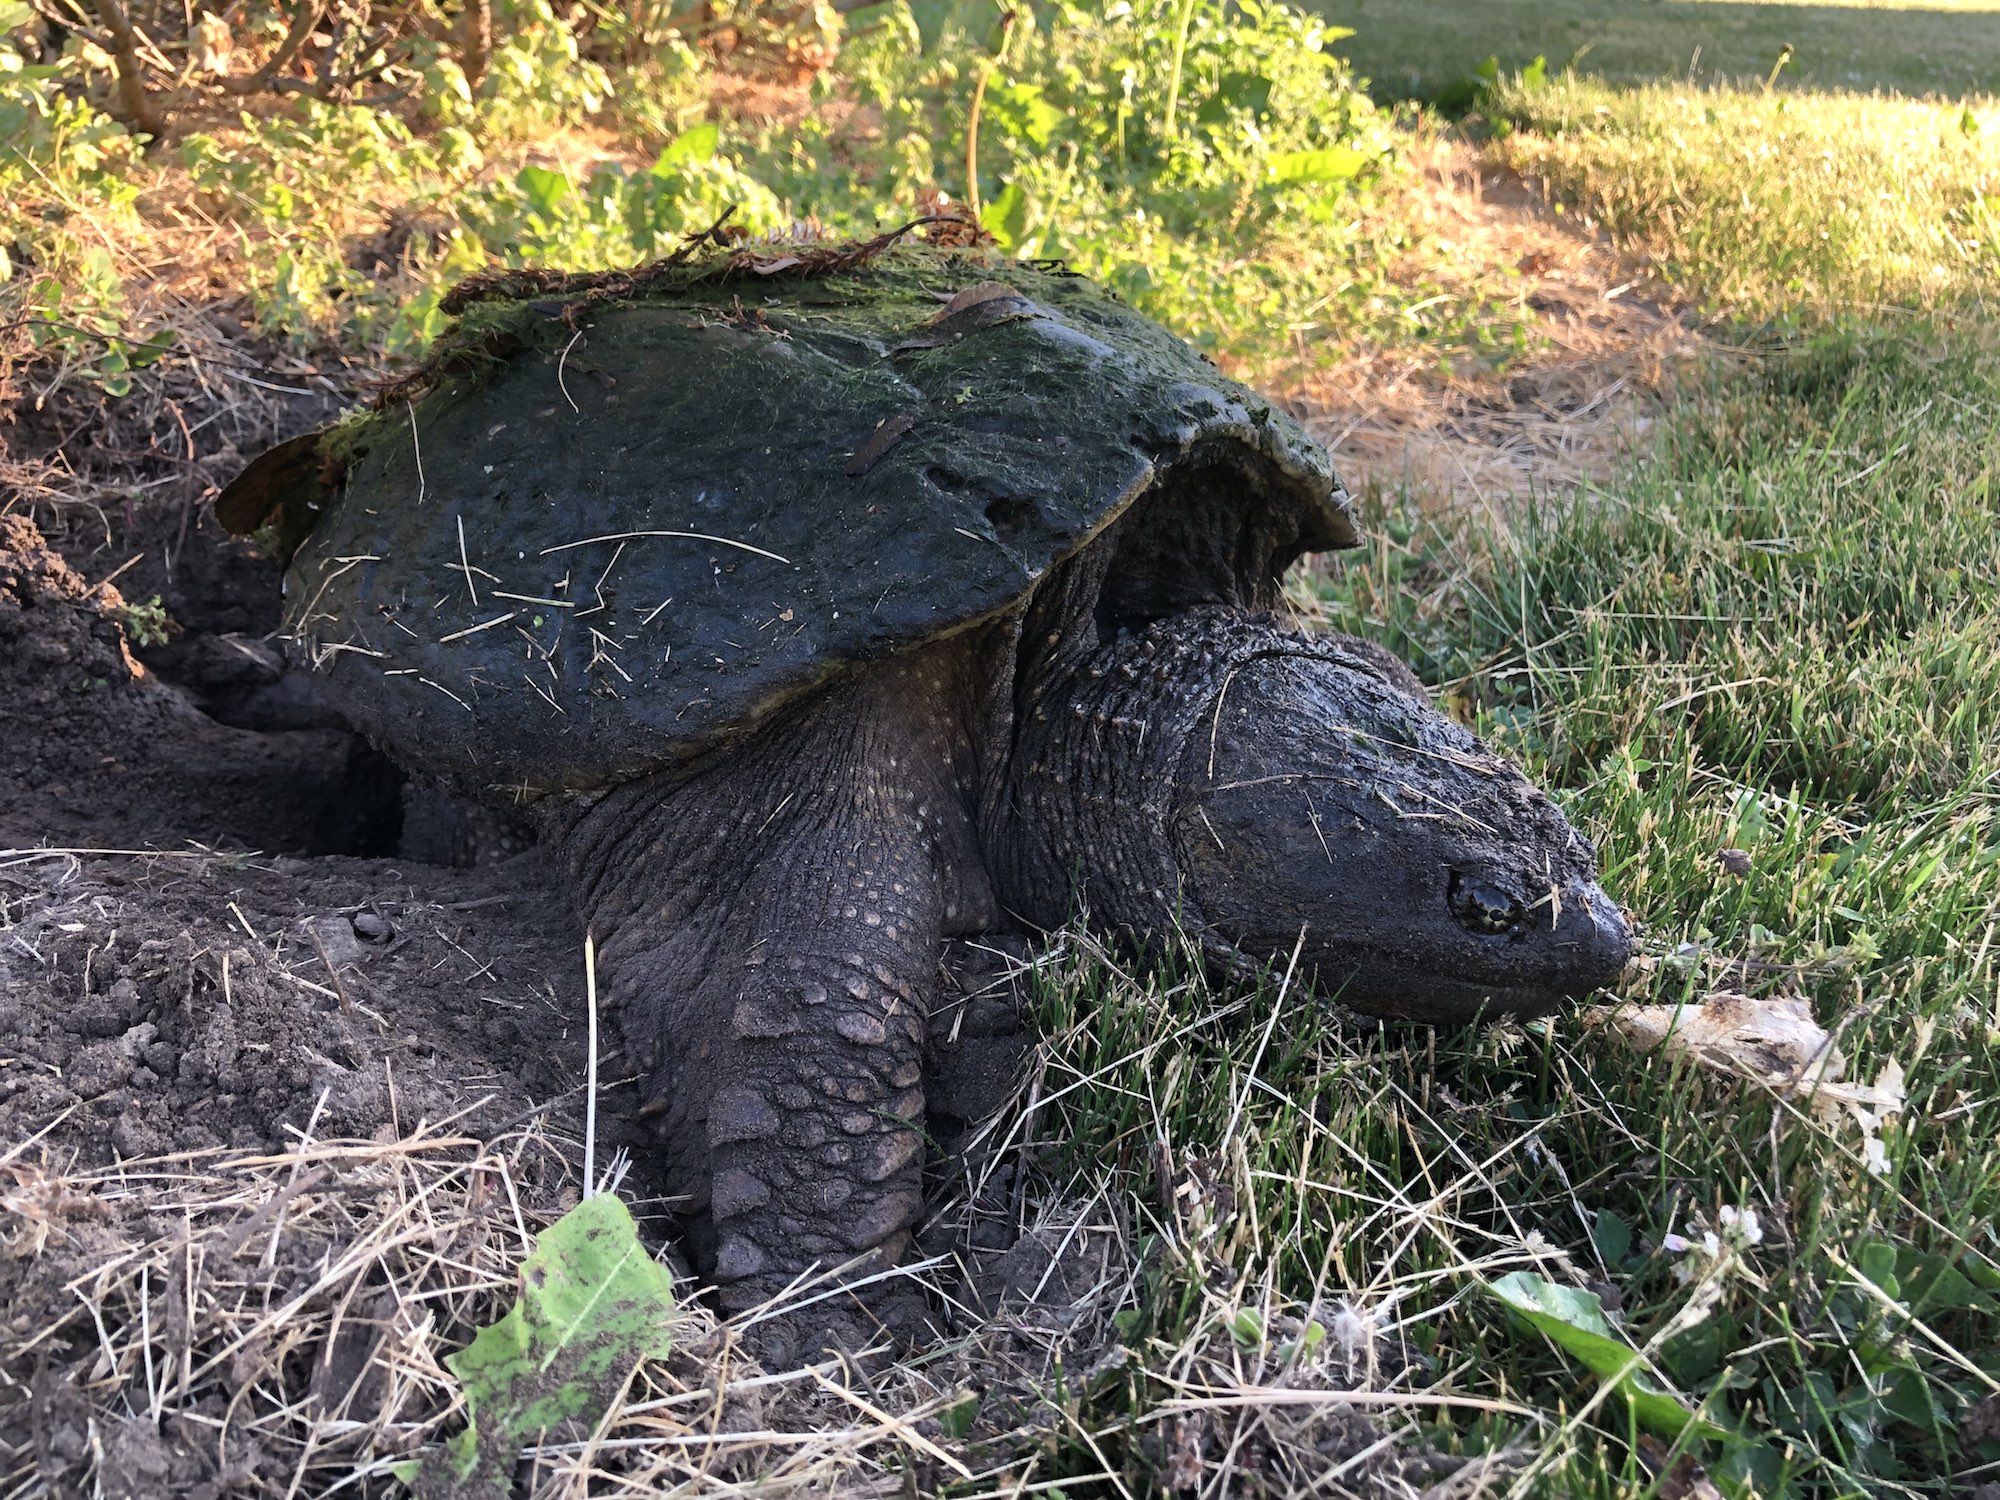 Snapping Turtle in E. Ray Stevens Pond and Aquatic Gardens on corner of Manitou Way and Nakoma Road in Madison, Wisconsin on June 9, 2021.